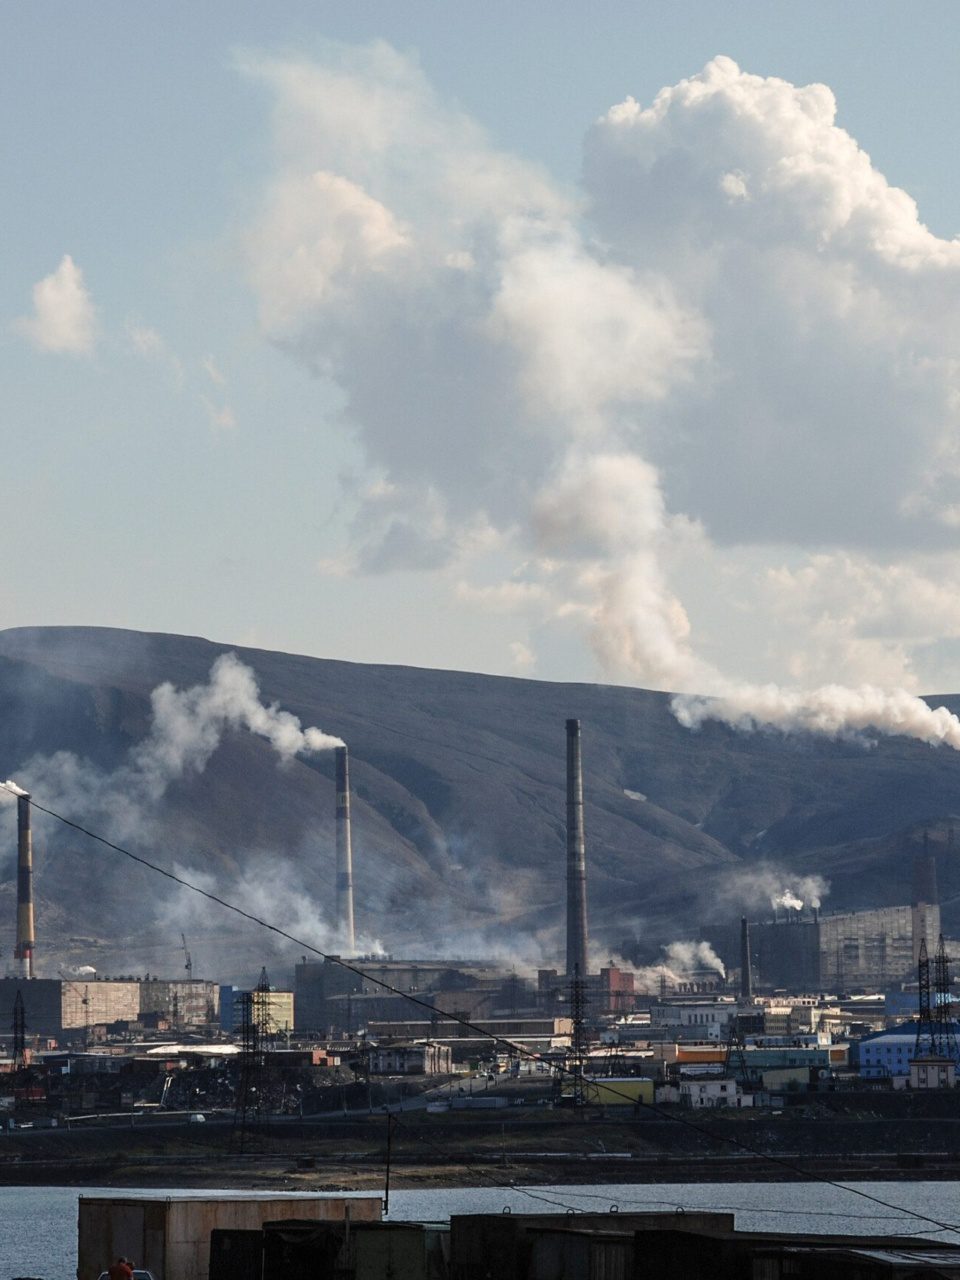 Norilsk, Russia: A large amount of harmful emissions significantly impairs the environment.